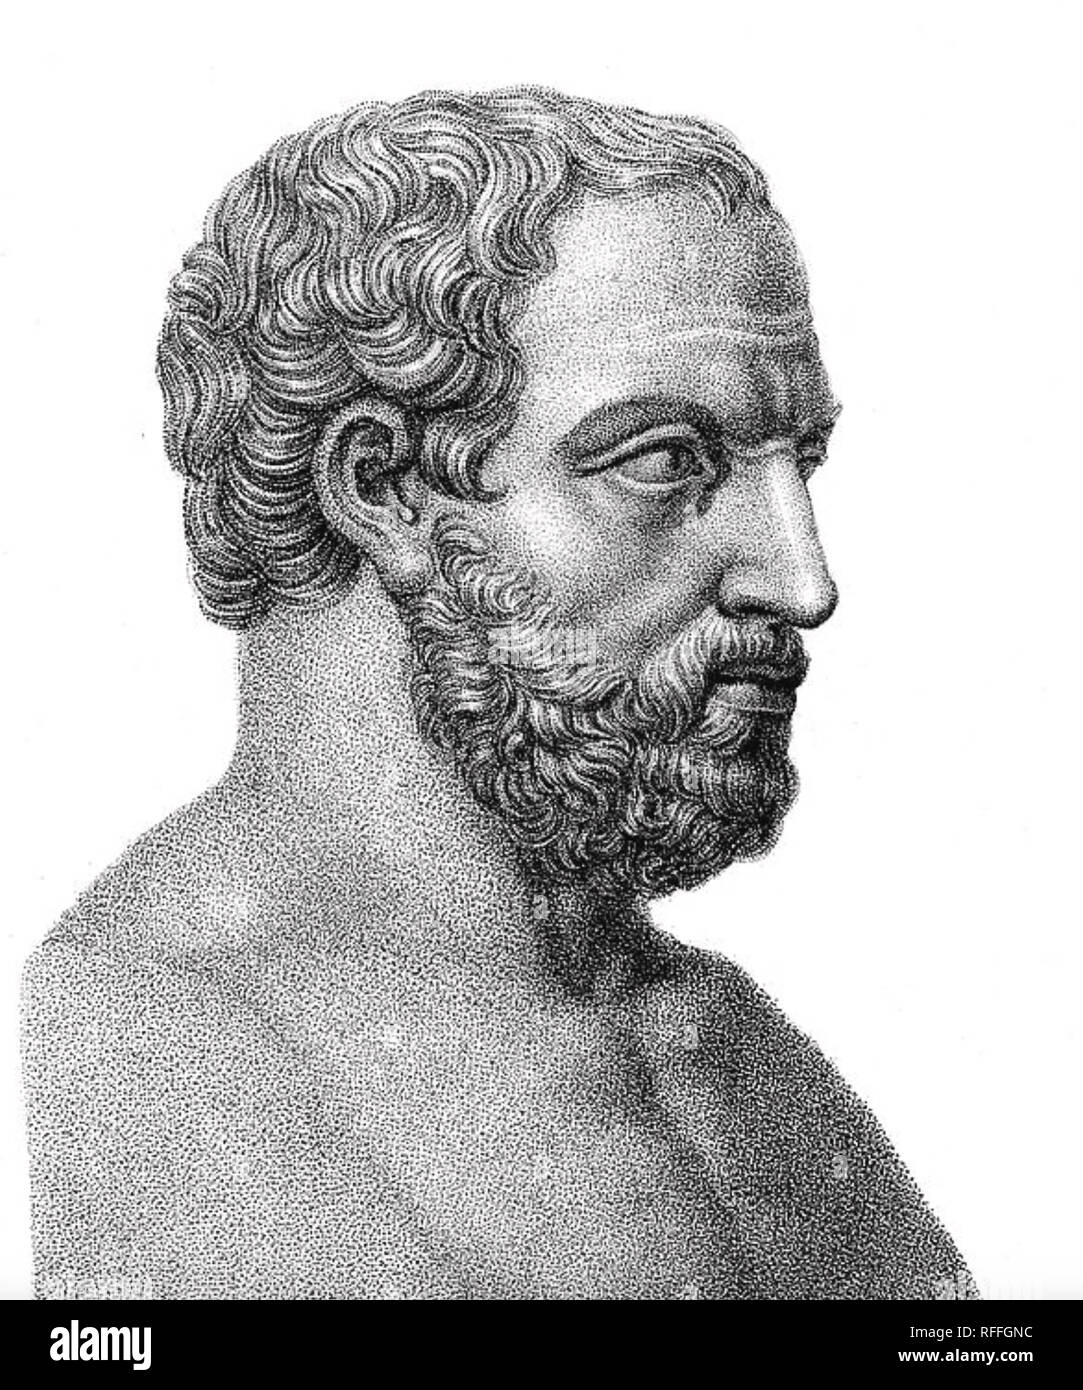 THUCYDIDES (c 460-c 400 BC) Athenian historian and army commander. Engraving based on Greek original of the fourth century BC. Stock Photo